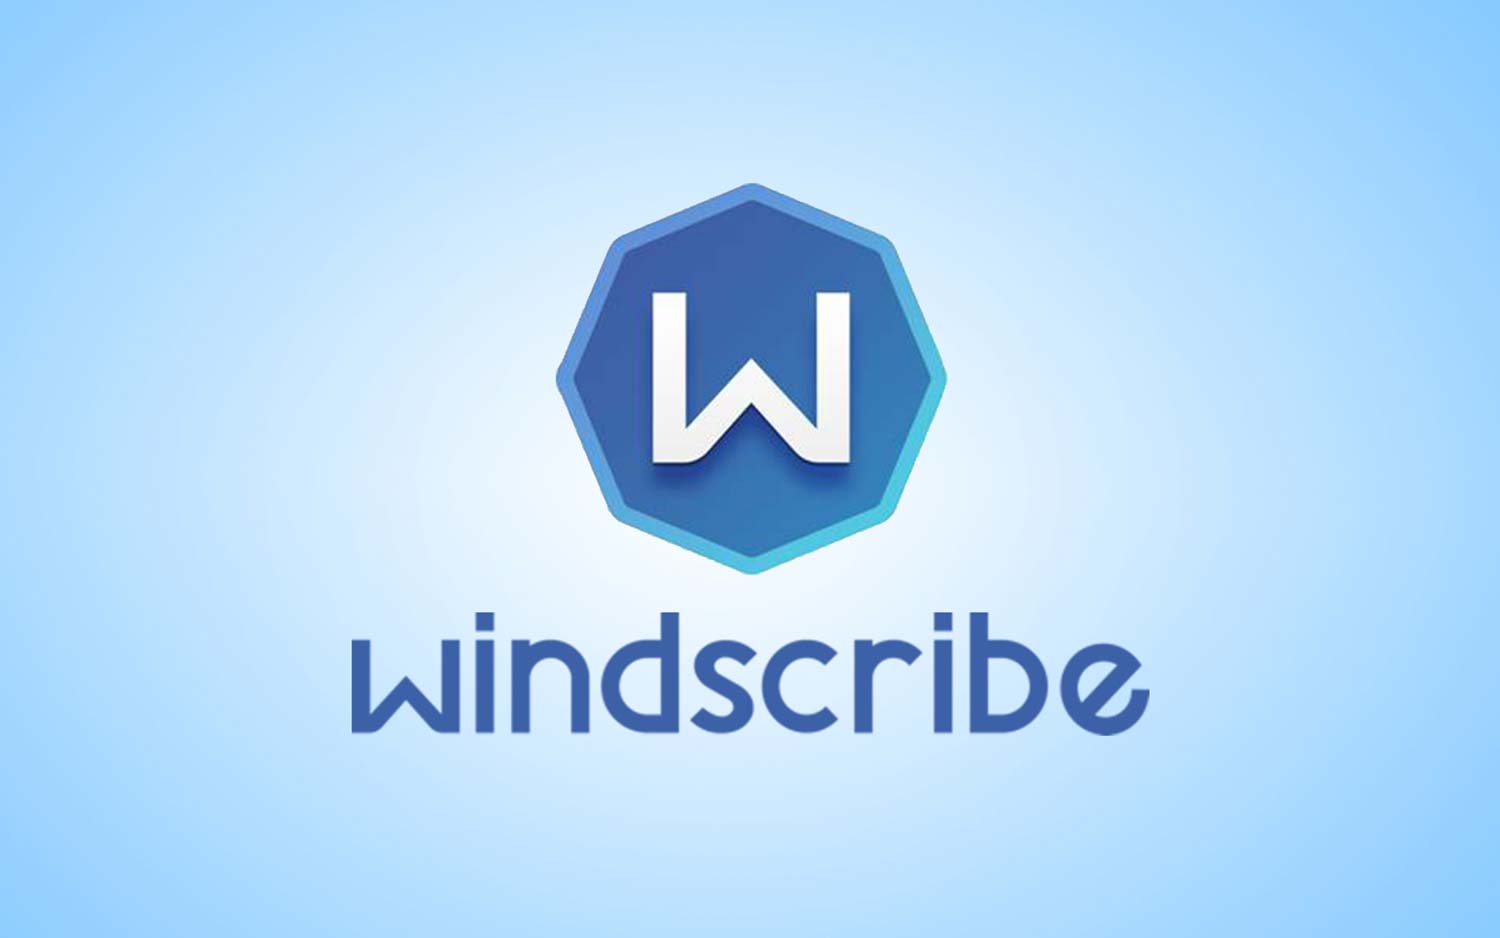 Windscribe Free VPN - Full Review and Benchmarks | Tom's Guide